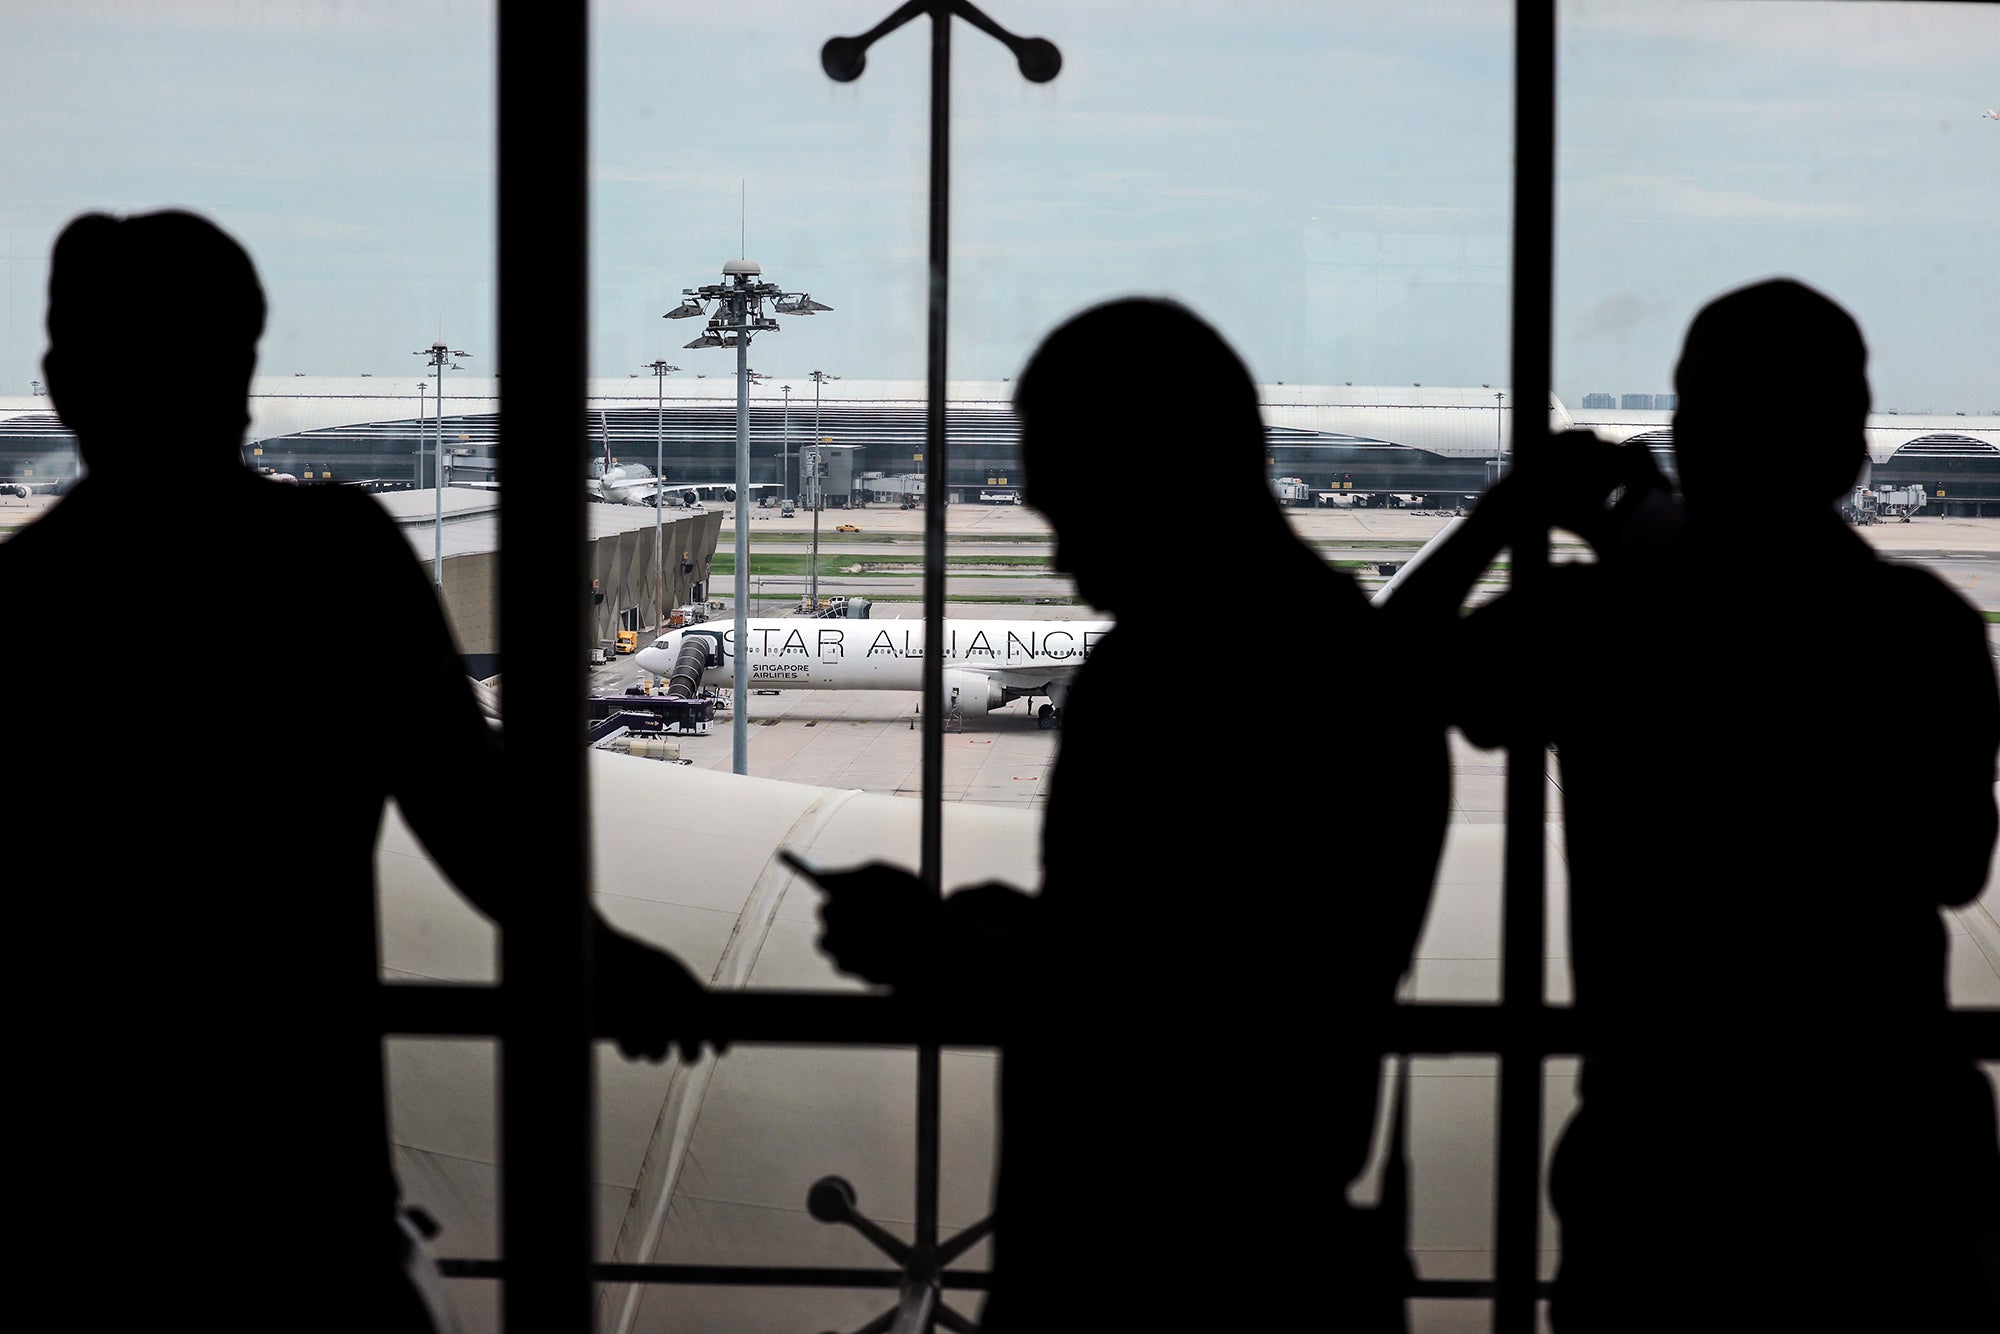 Photograph looking outwards from an airport window to a parked Signapore Airlines flight on the tarmac as passengers seen in silhouette stand in front of the window taking photos, looking at the plane, and using their phones